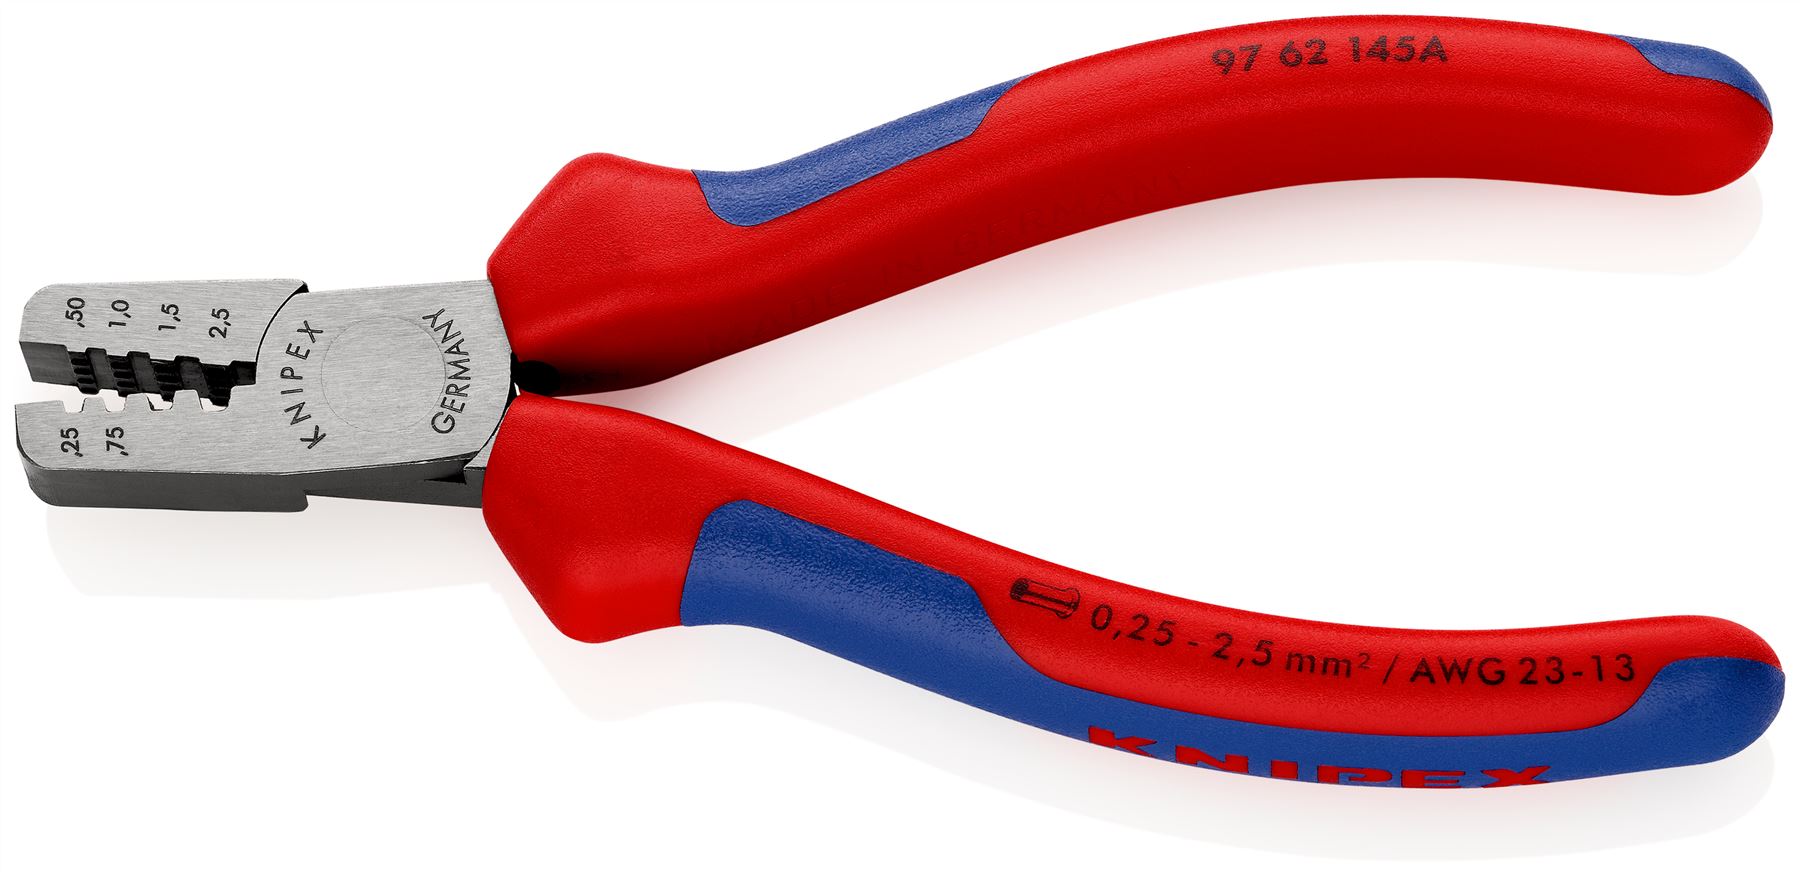 KNIPEX Crimping Pliers for Wire Ferrules 145mm 0.25-2.5mm² 145mm Multi Component Grips 97 62 145 A